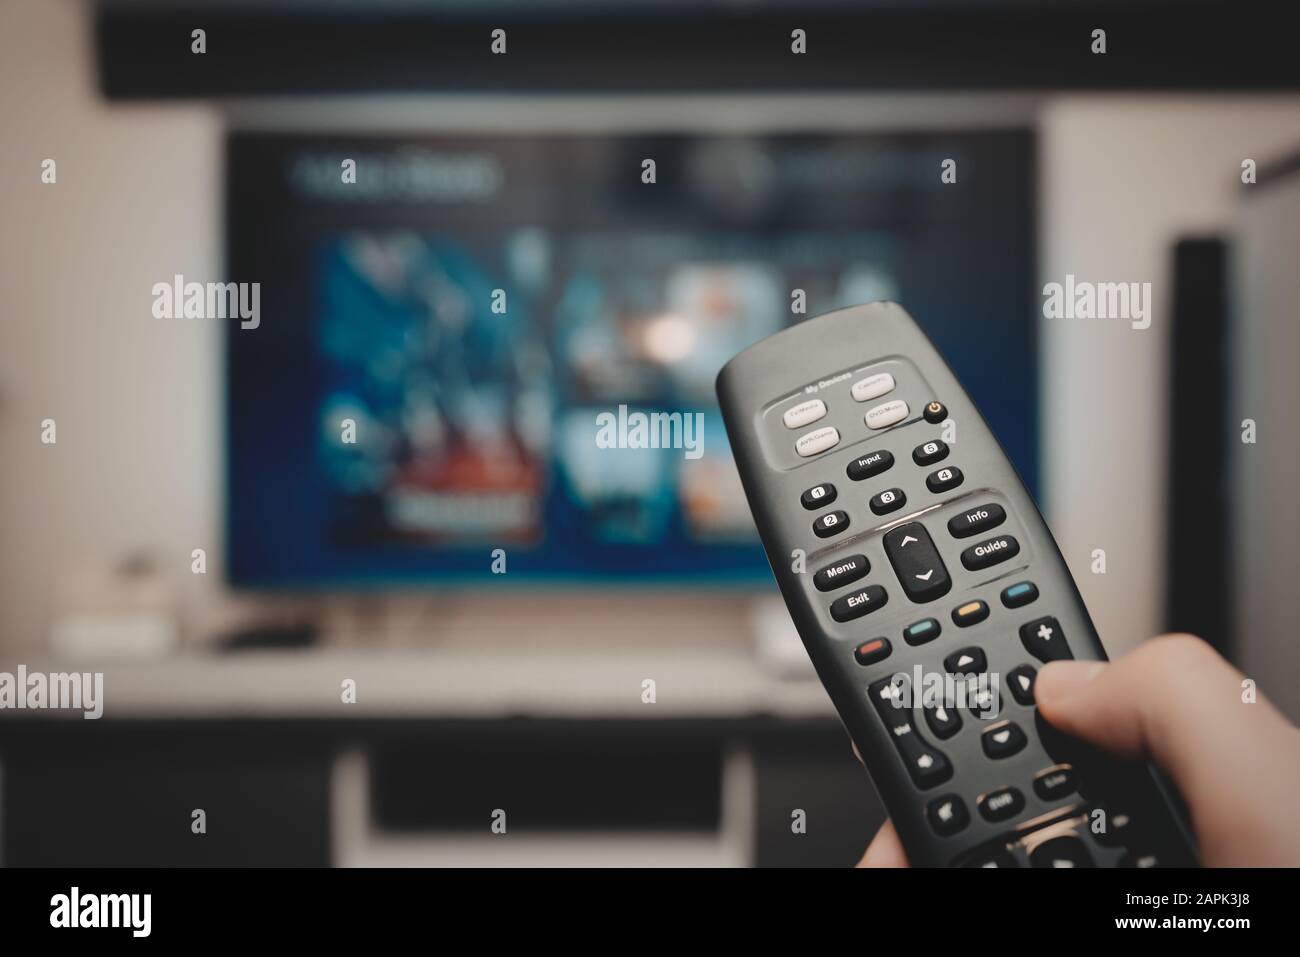 VOD service on television. Man watching TV, streaming service, video on demand, remote control in hand. Stock Photo